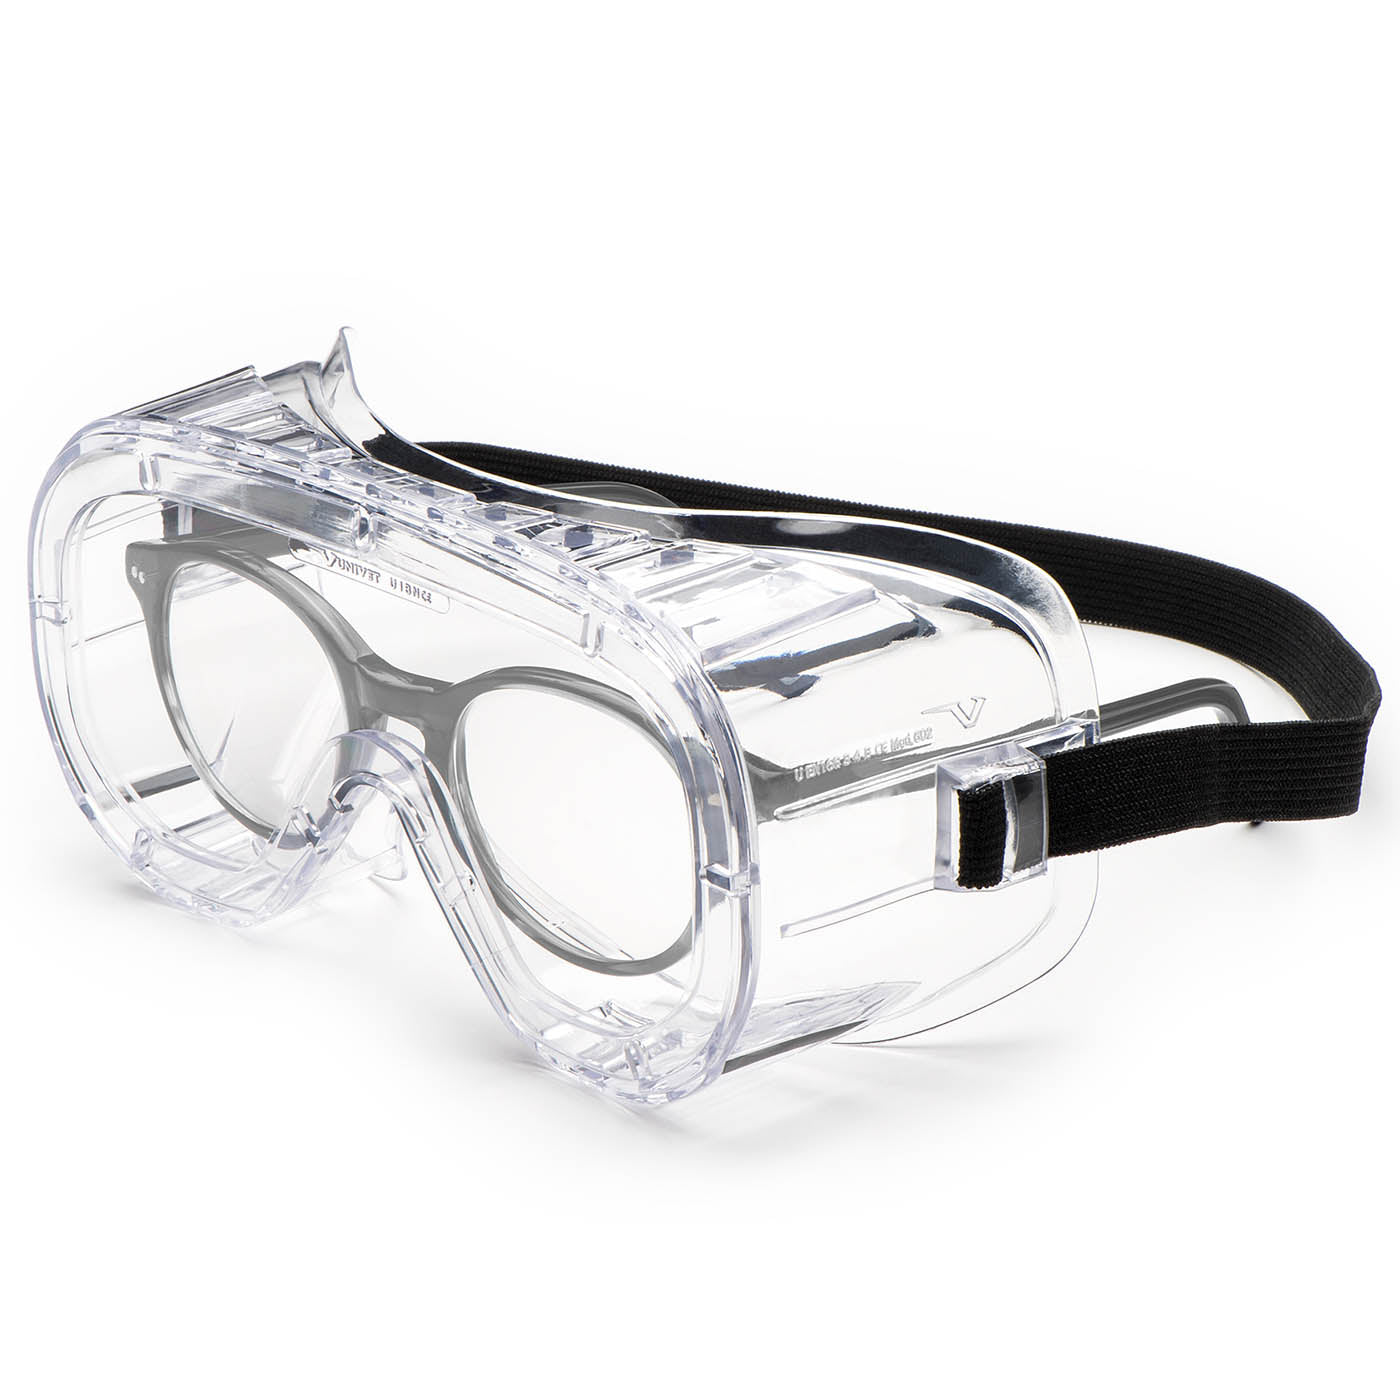 Univet 602 Clear Overspec Safety Goggles - 602010001A